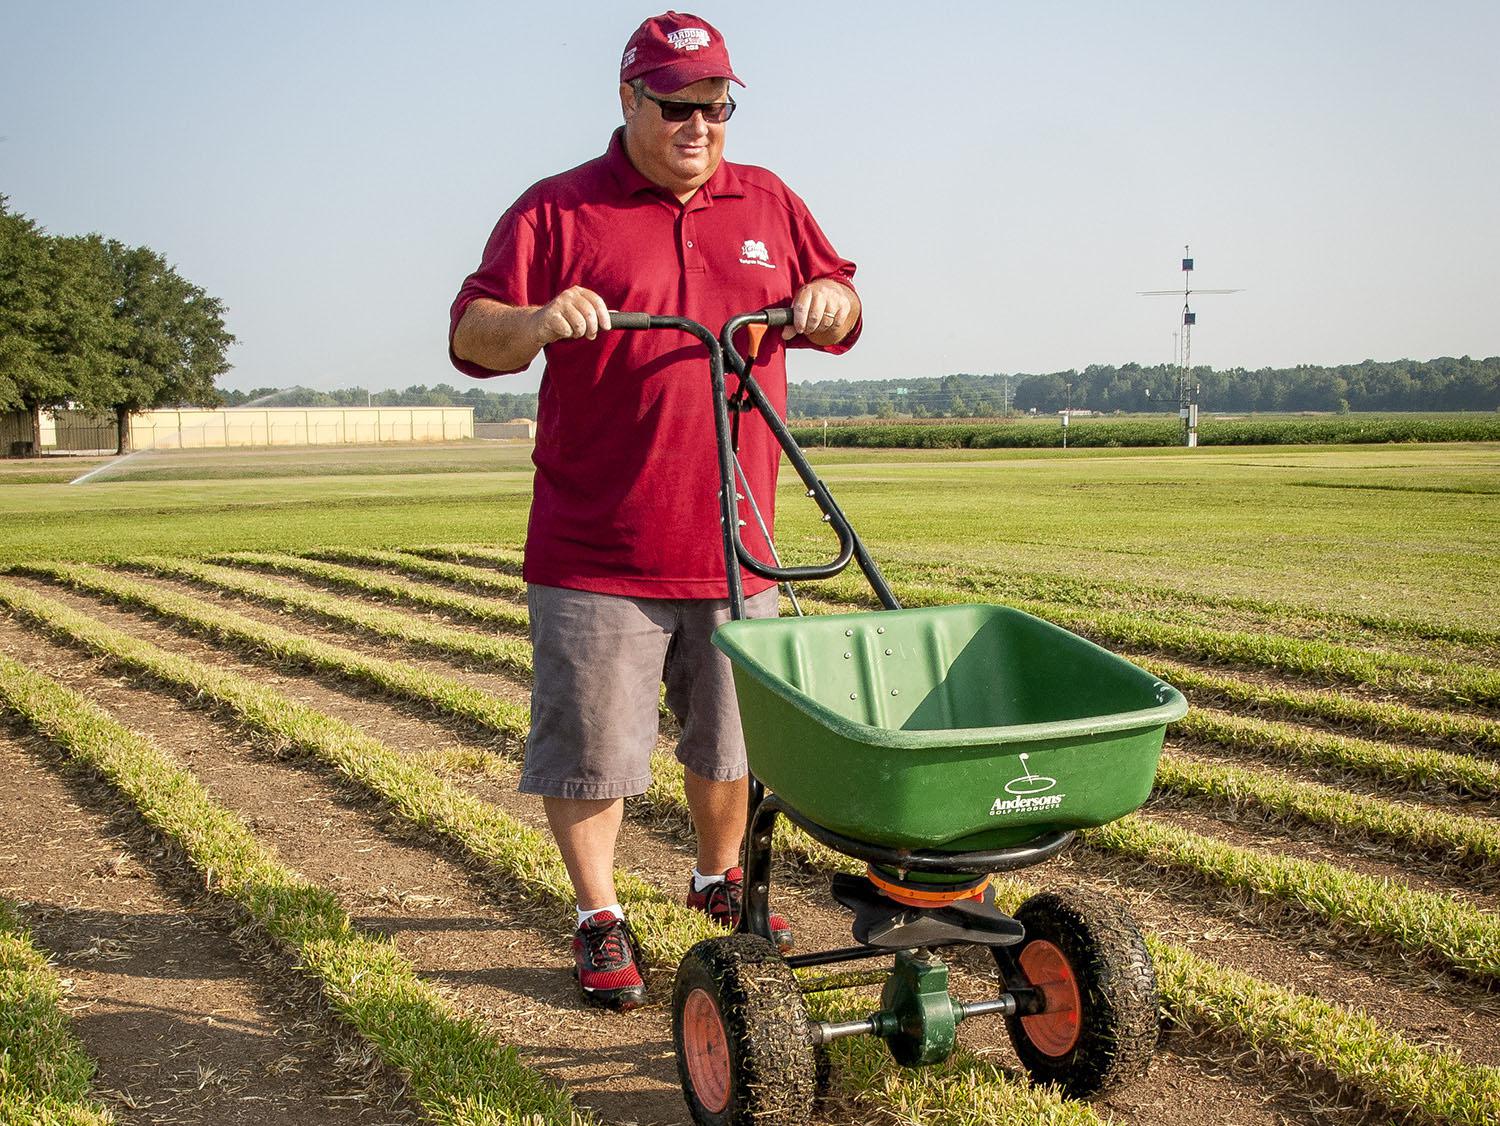 Barry Stewart, turf management specialist with the Mississippi Agricultural and Forestry Experiment Station, demonstrates fertilizing equipment on Aug. 29, 2013, on a recently cut patch of St. Augustine grass grown at Mississippi State University's R.R. Foil Research Center. (Photo by MSU Ag Communications/Scott Corey)